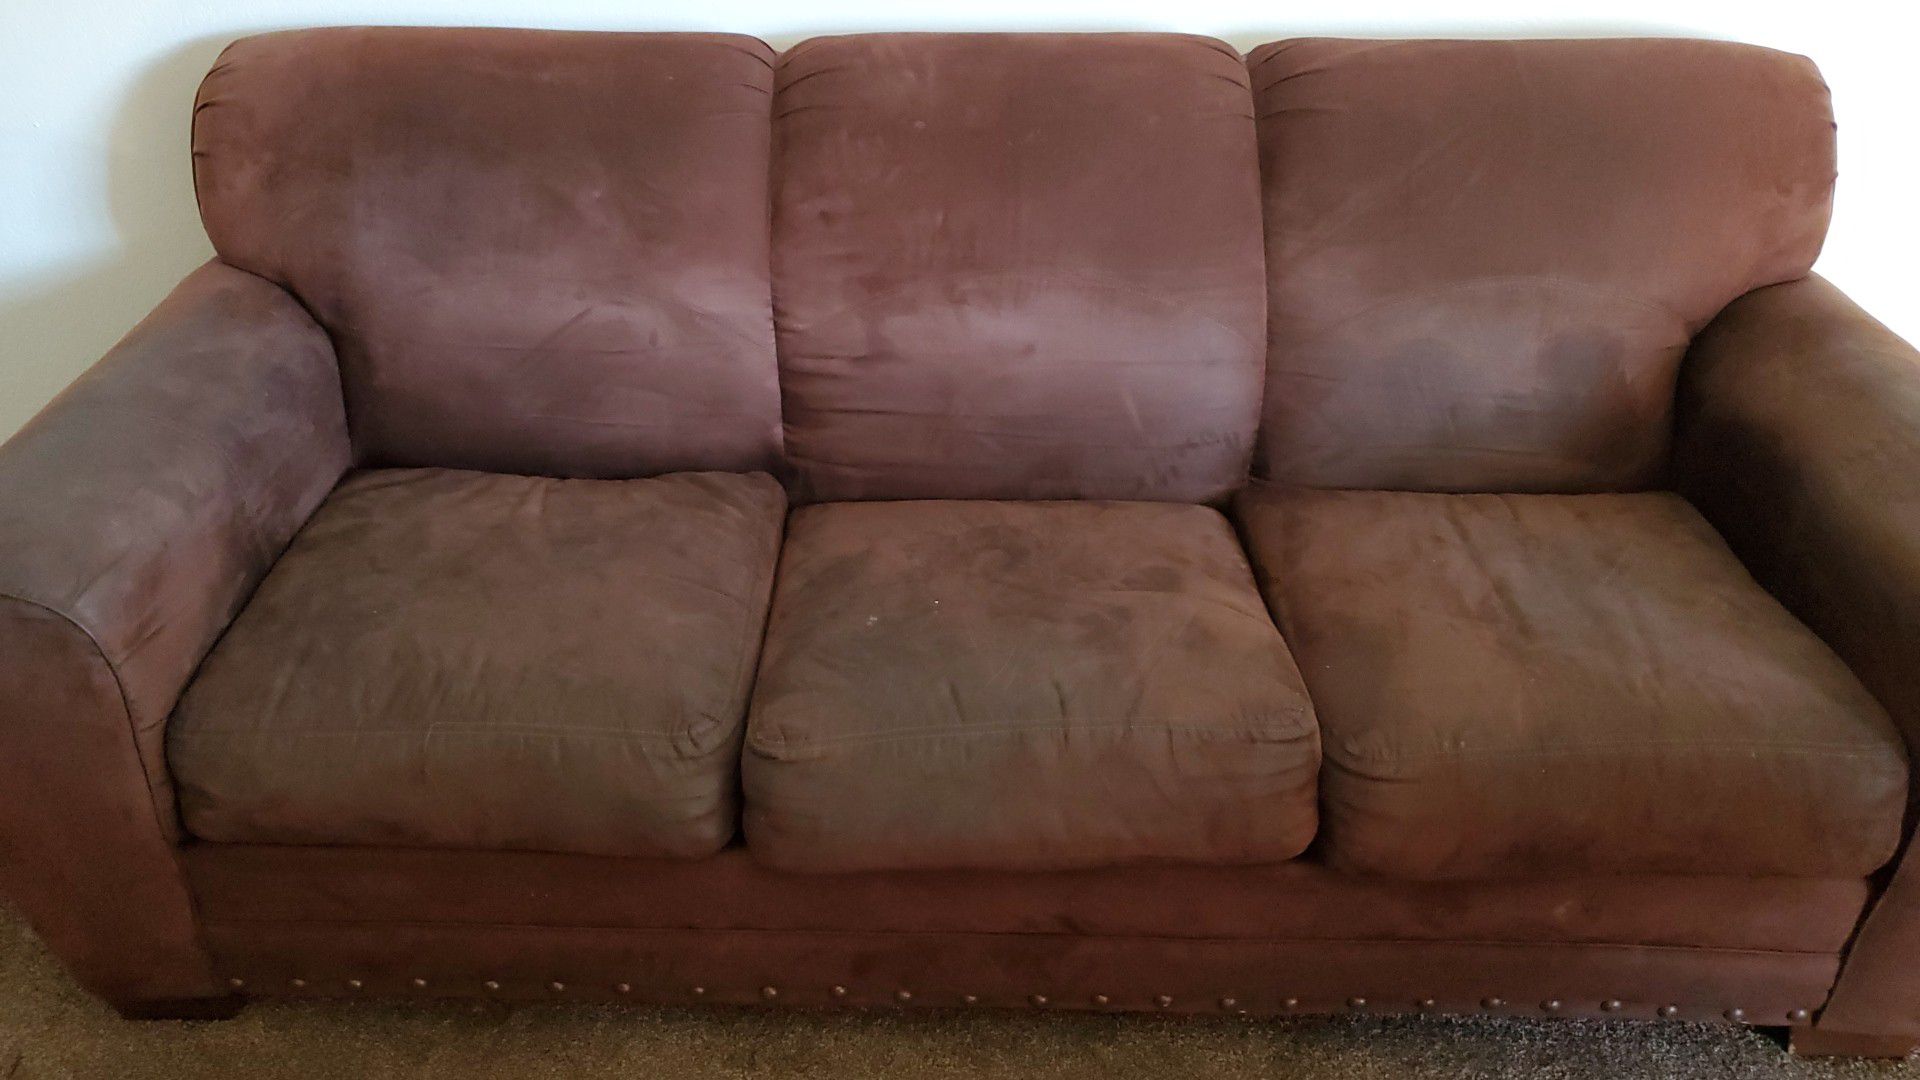 Couch $30 obo